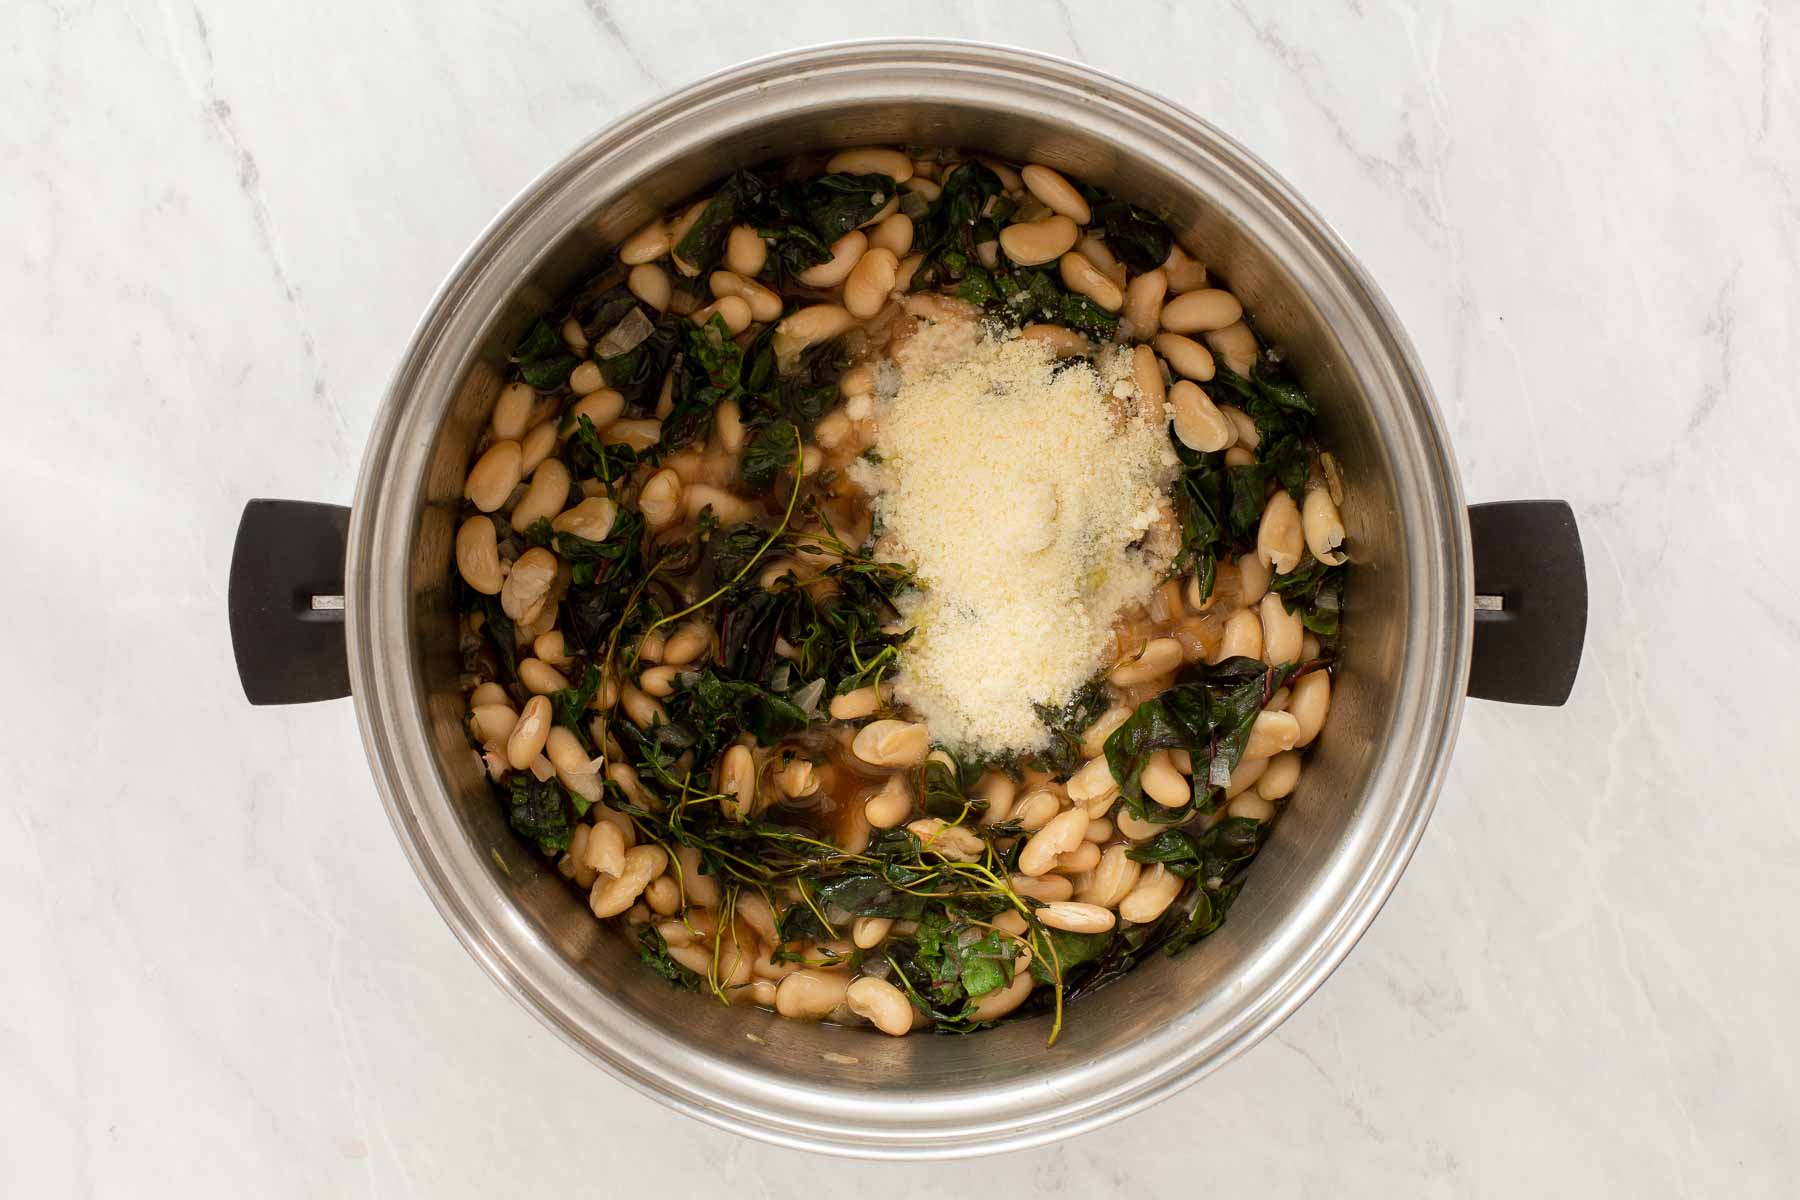 Adding Pecorino to soup pot with white beans and leafy greens.